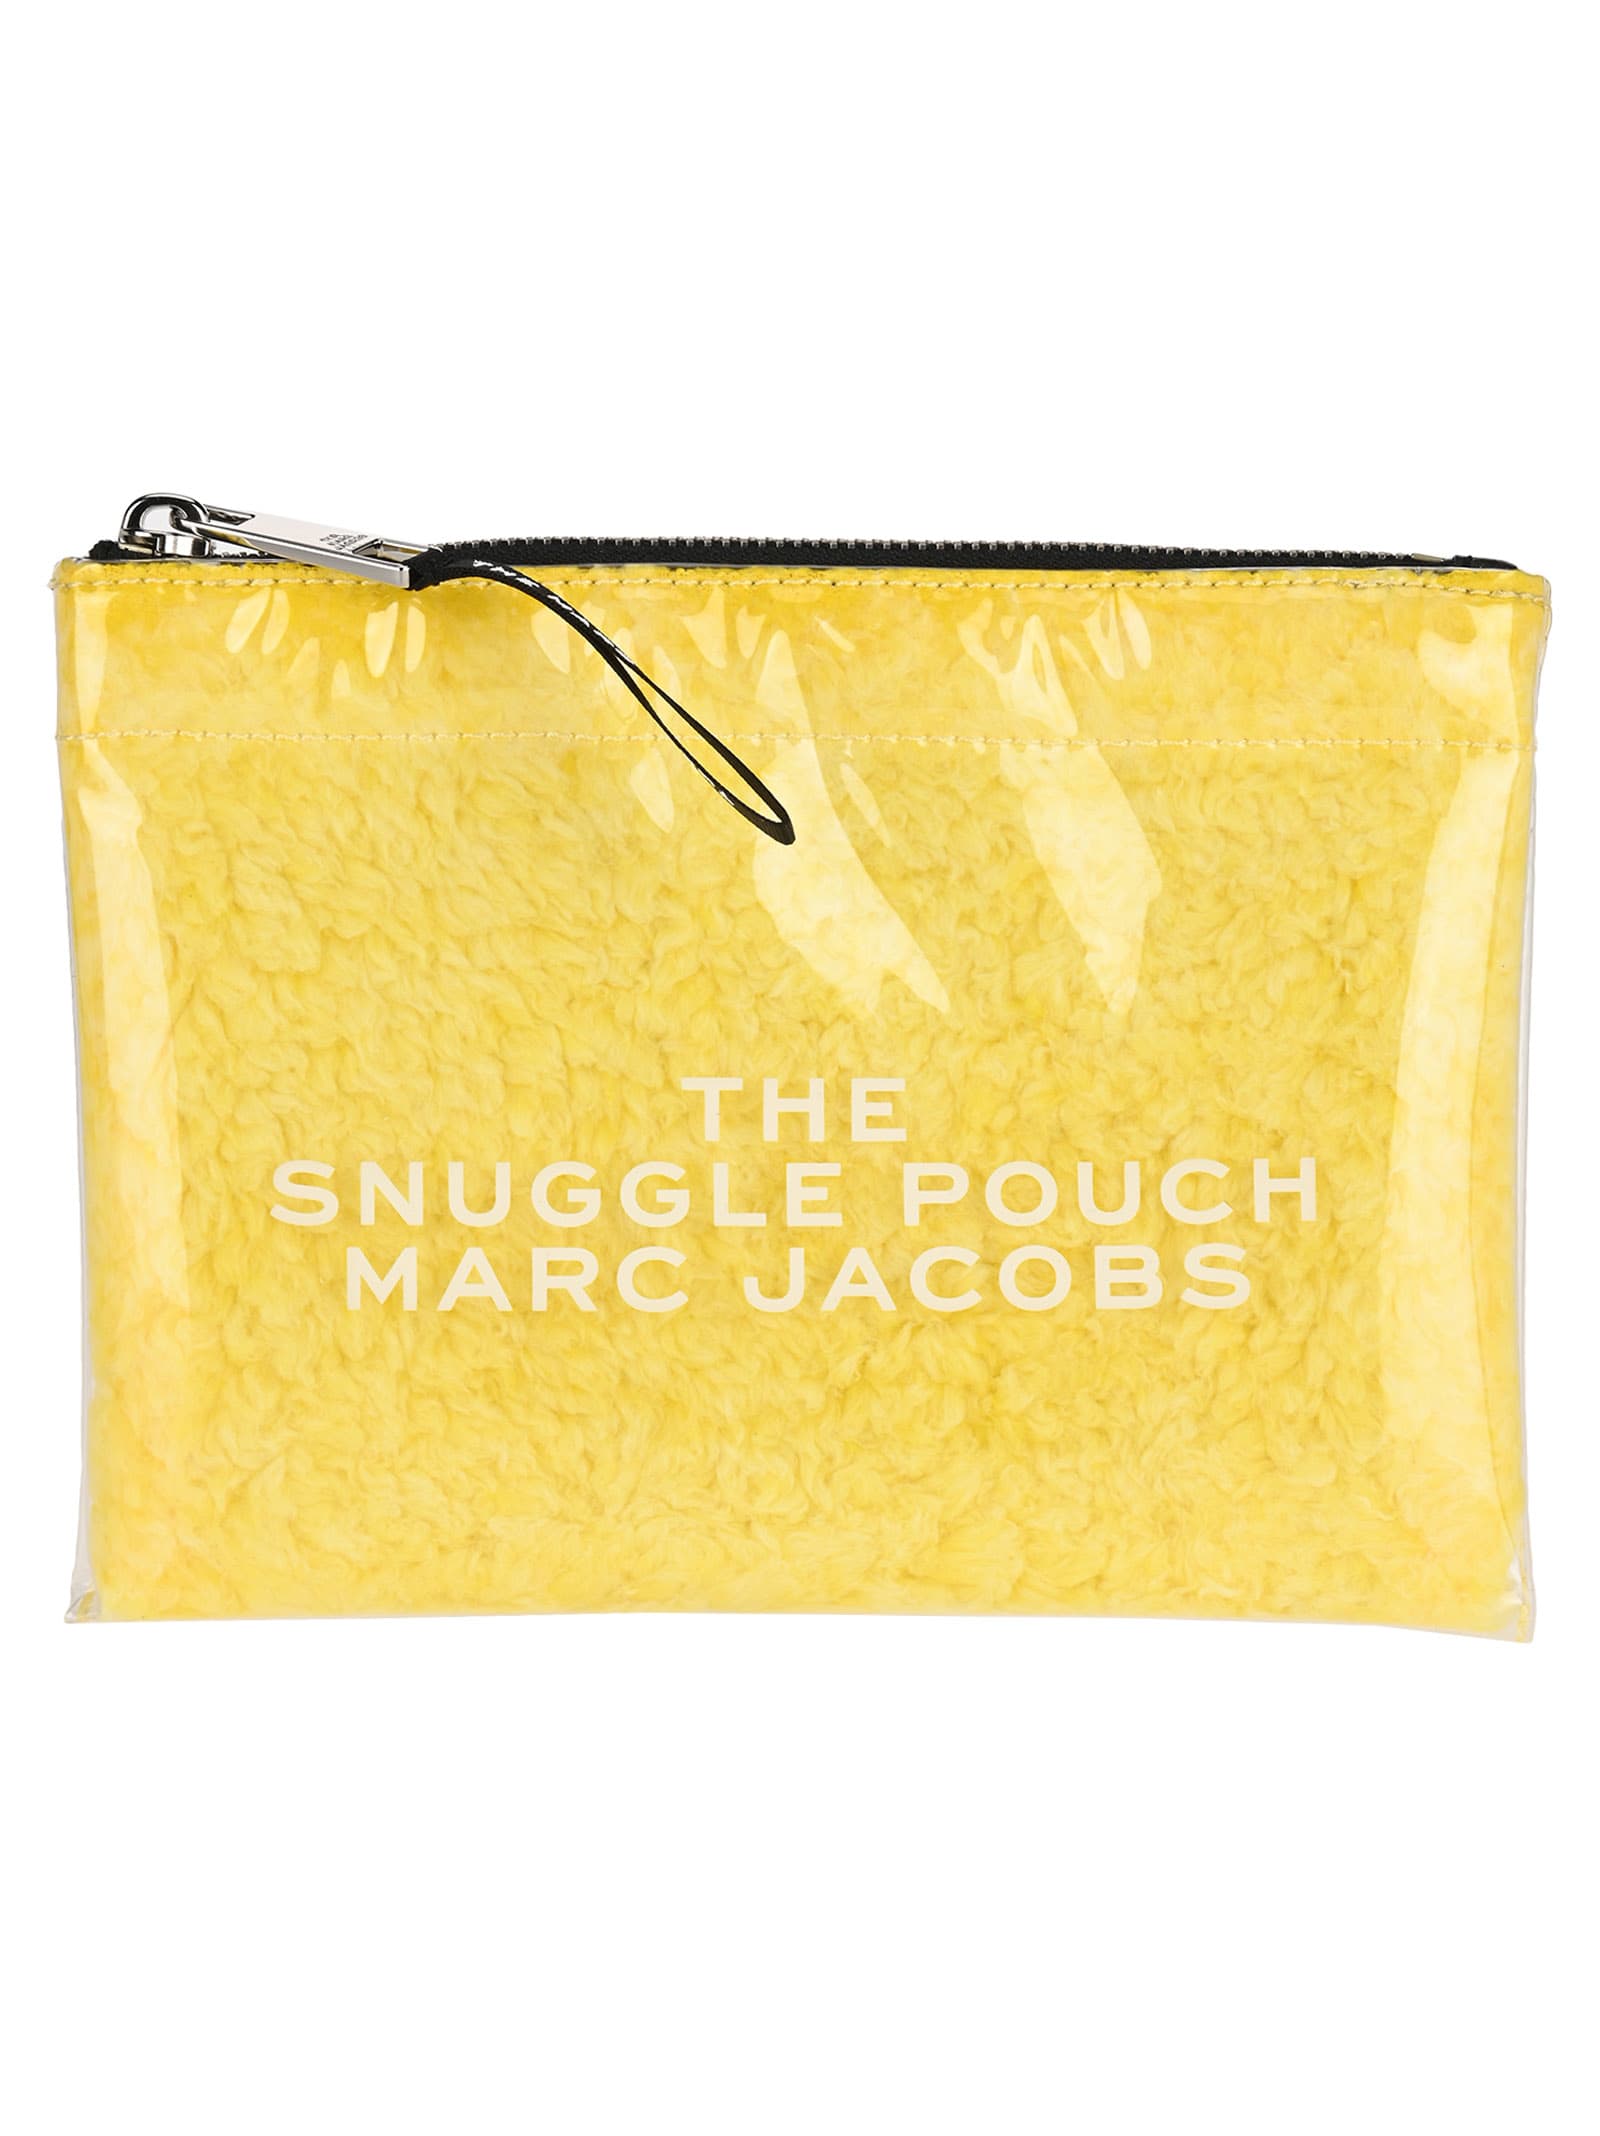 MARC JACOBS THE FLAT SNUGGLE POUCH,11270711